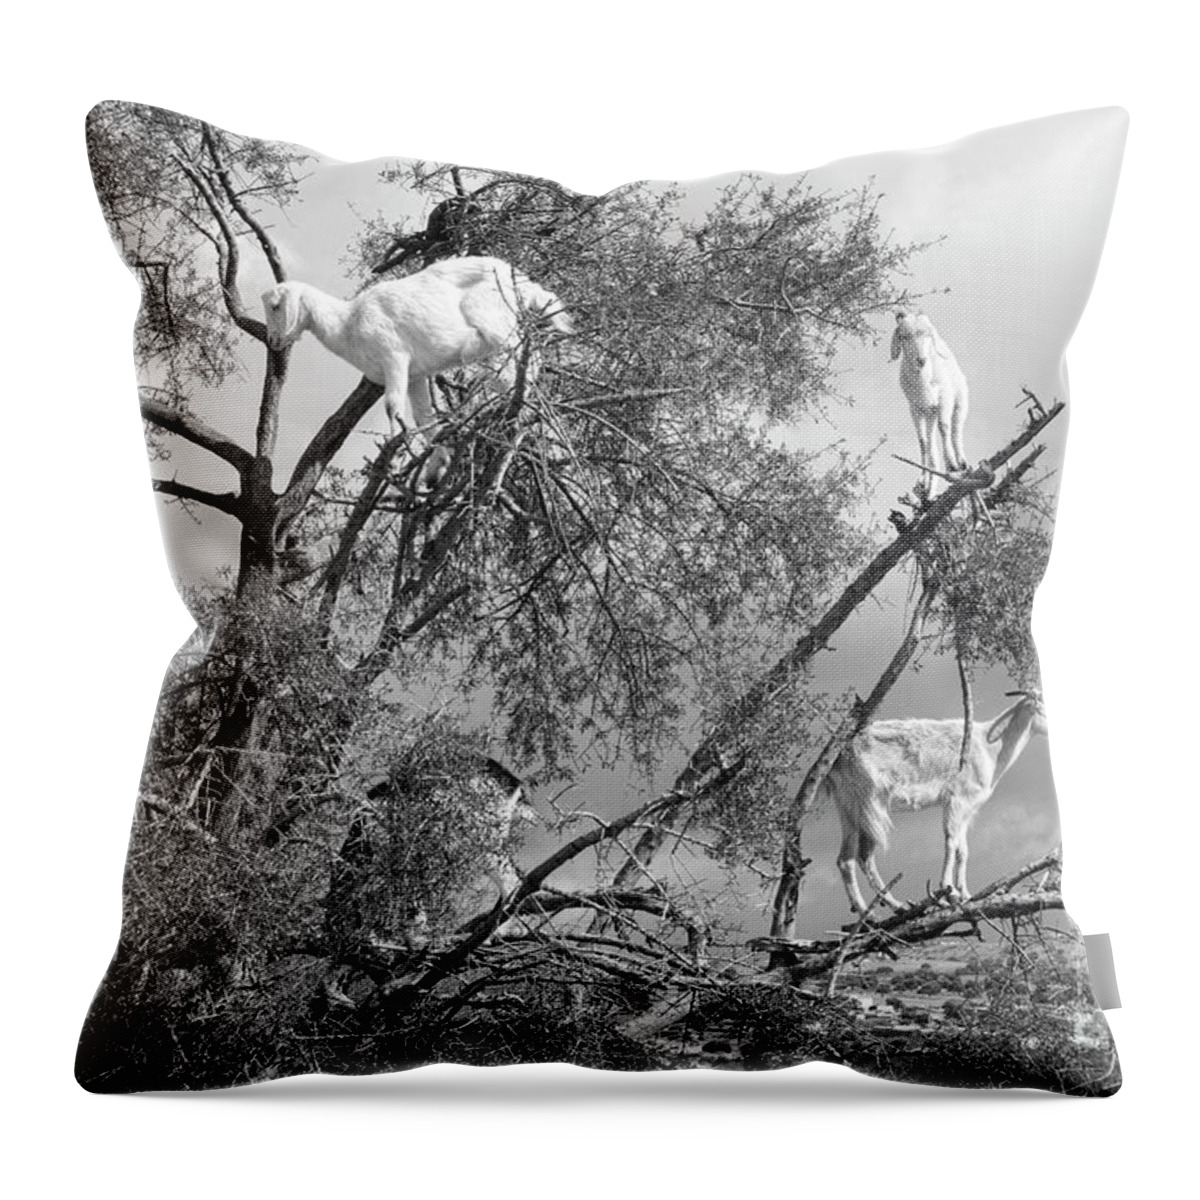 Morocco Throw Pillow featuring the photograph Goats in Tree BW by Chuck Kuhn